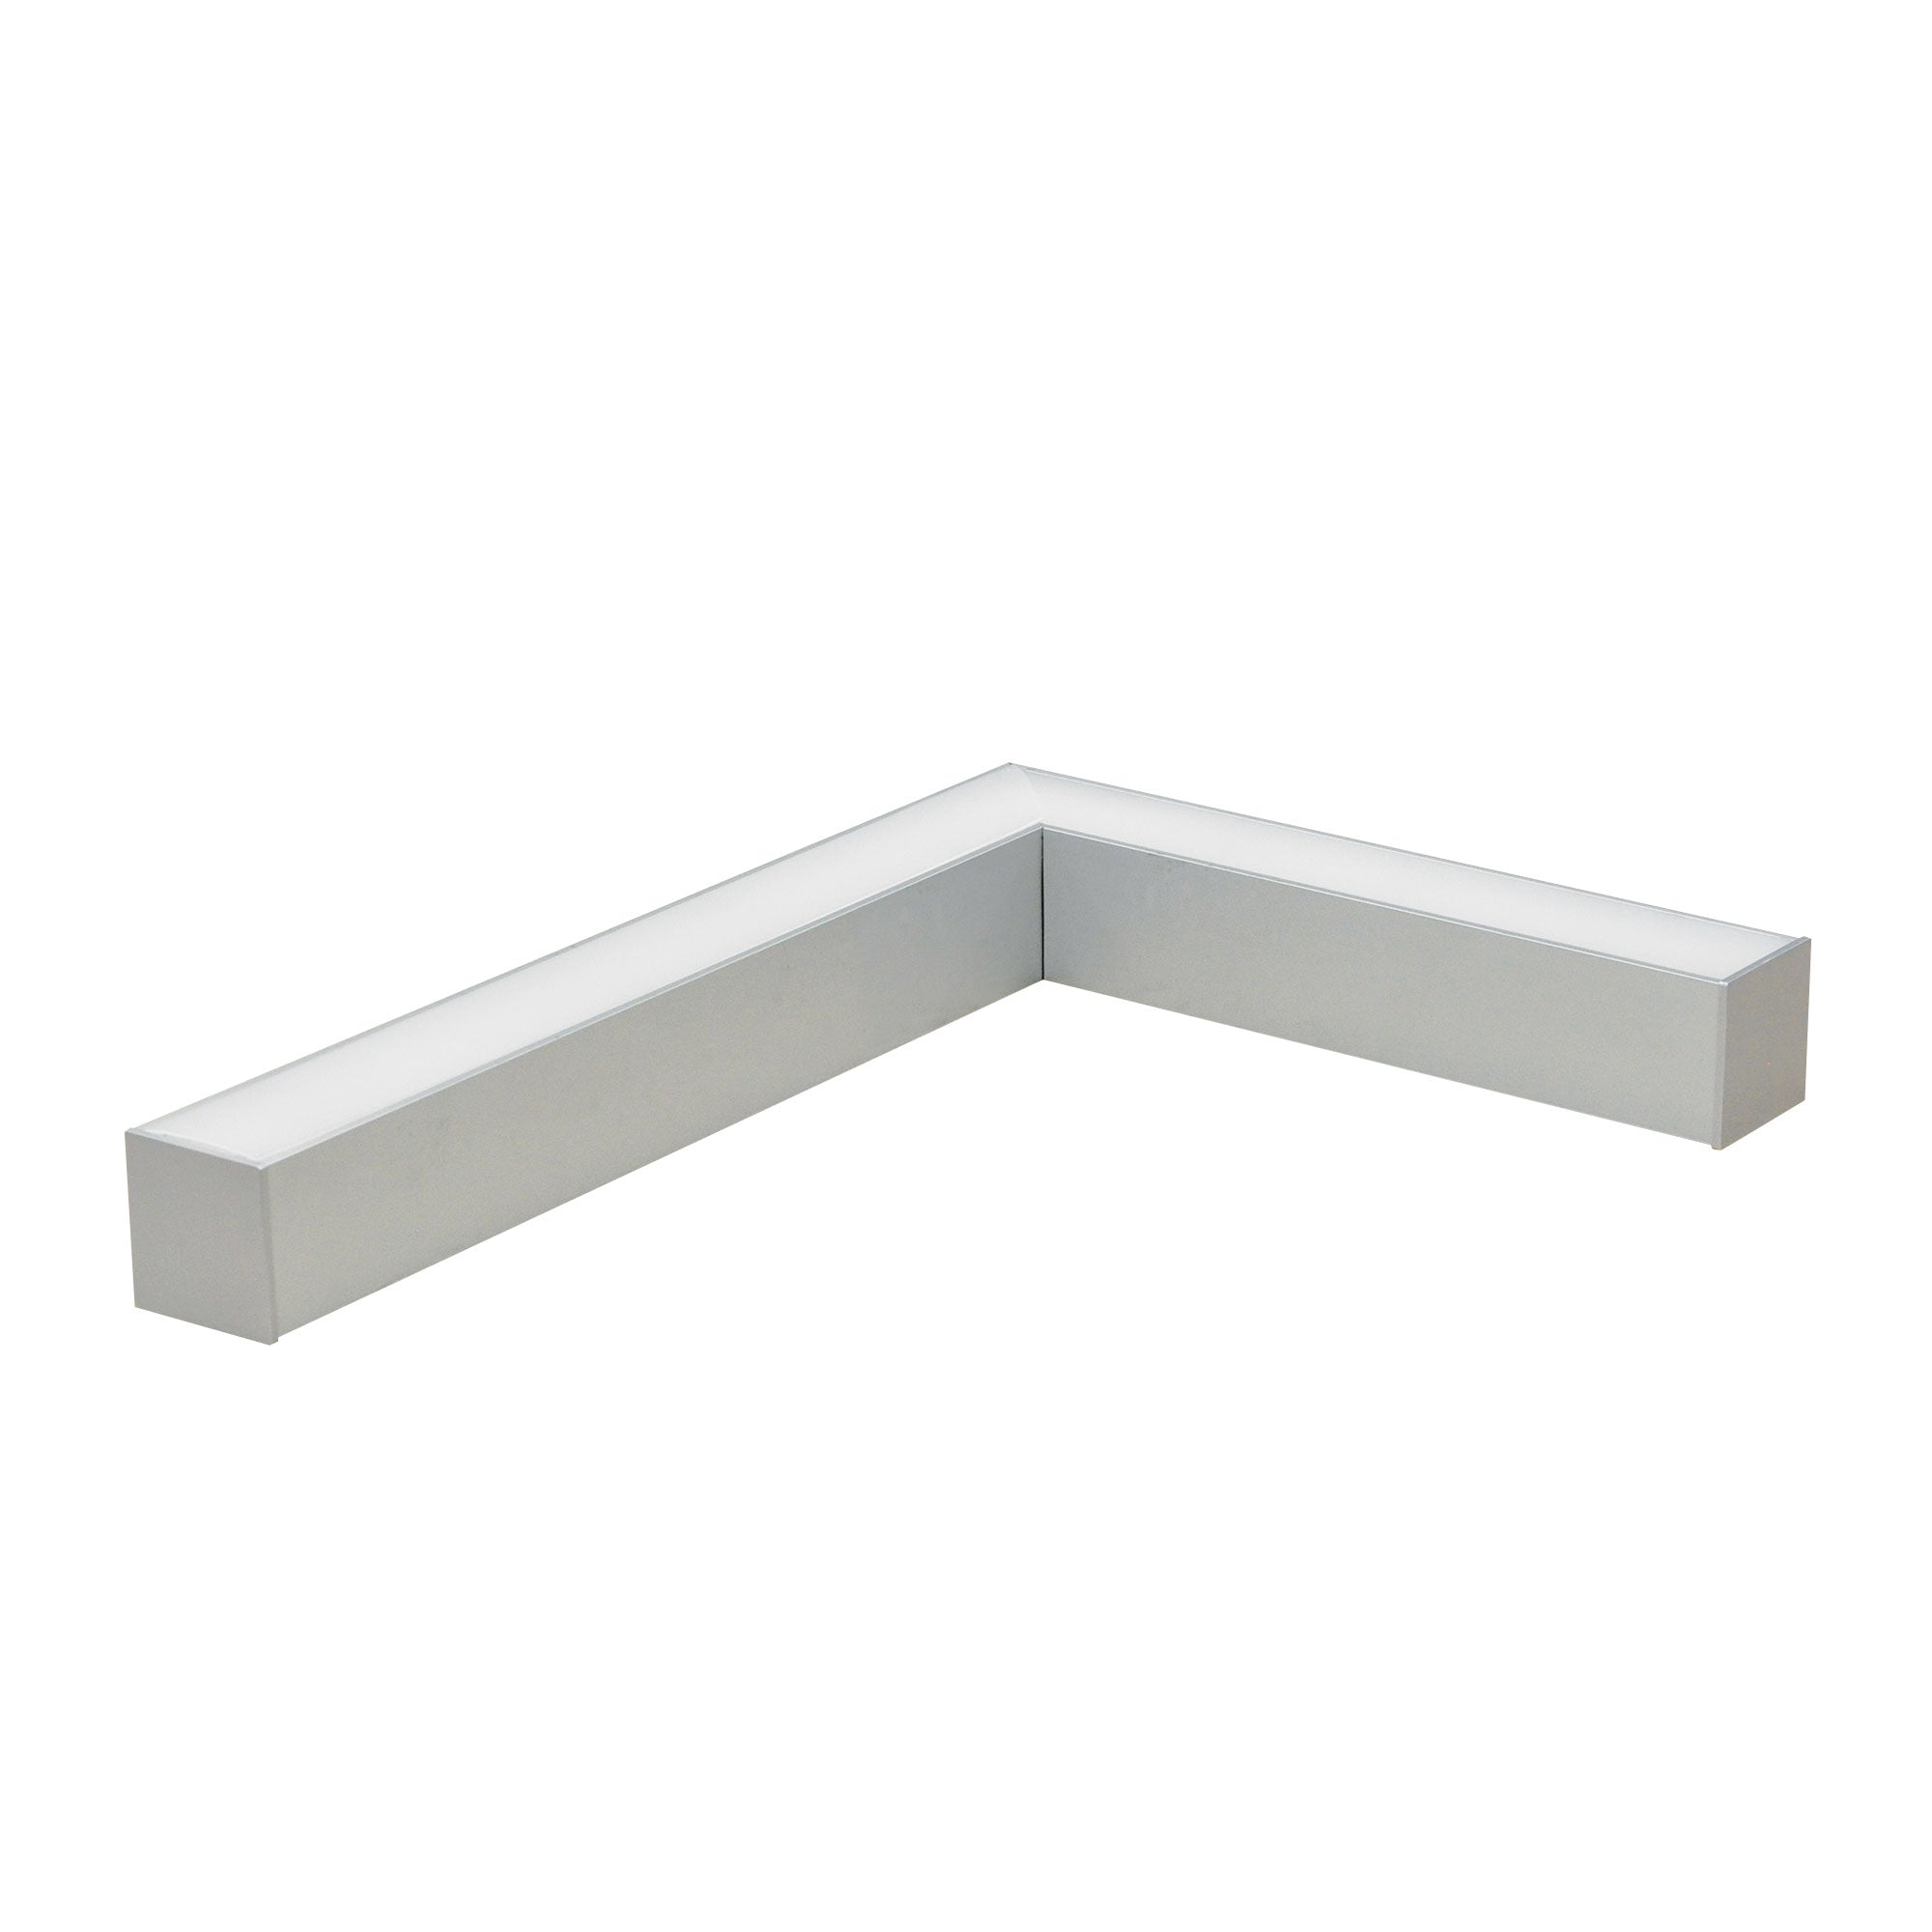 Nora Lighting NLIN-L1035A - Linear -  InchL Inch Shaped L-Line LED Direct Linear w/ Dedicated CCT, 3000lm / 3500K, Aluminum Finish